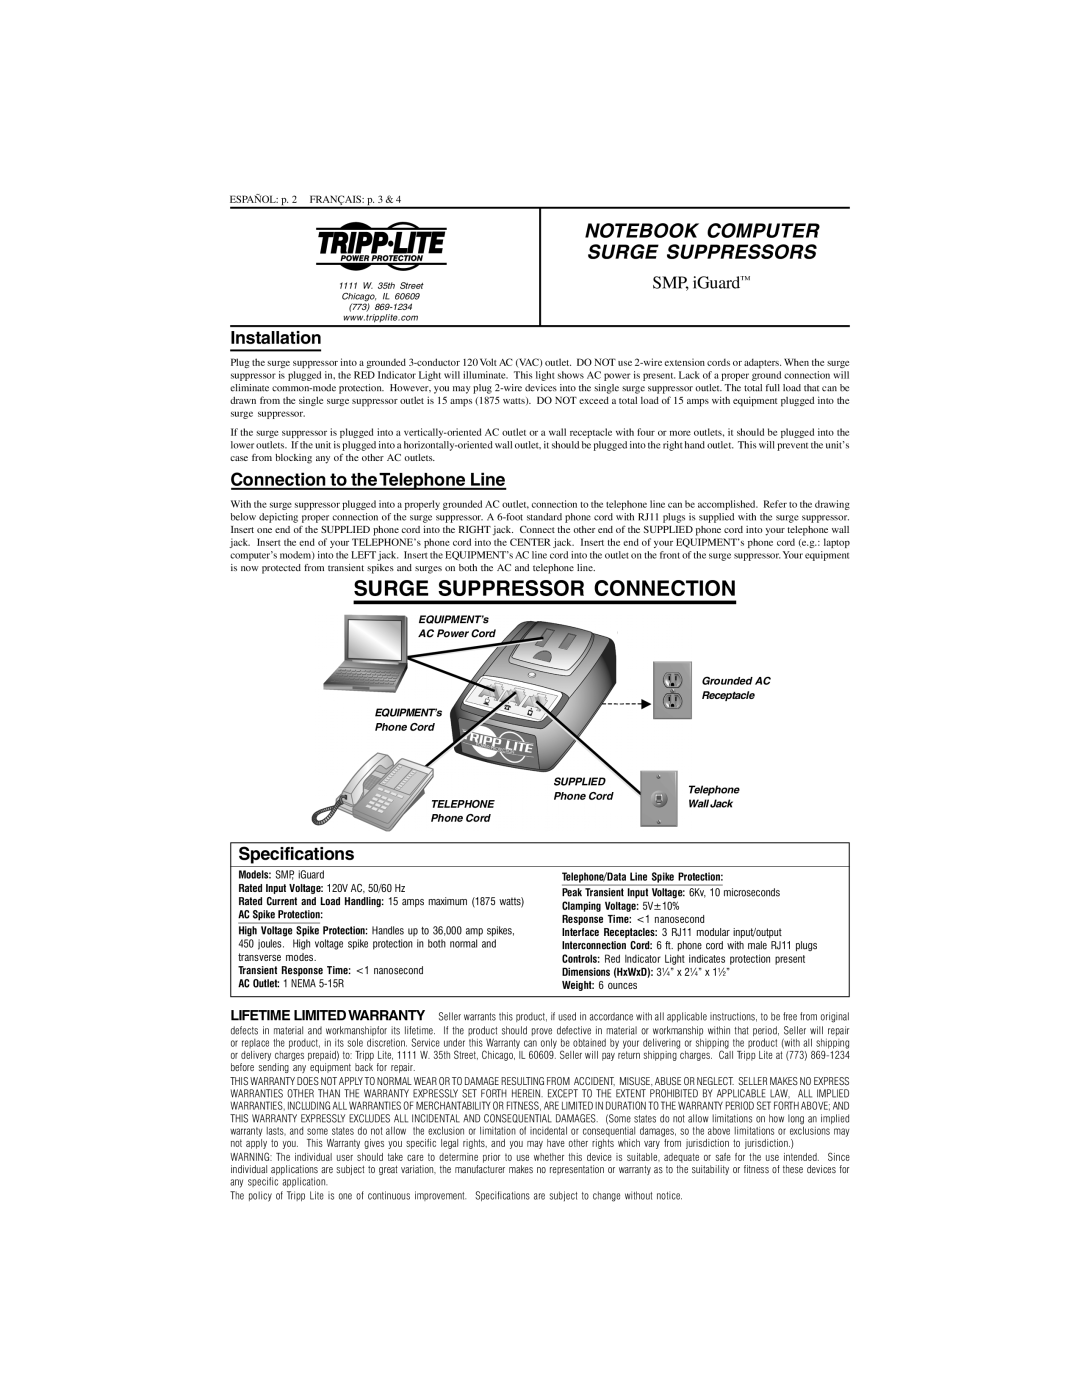 Tripp Lite SMP, iGuard specifications Installation, Connection to the Telephone Line, Specifications, TELEPHONE Phone Cord 